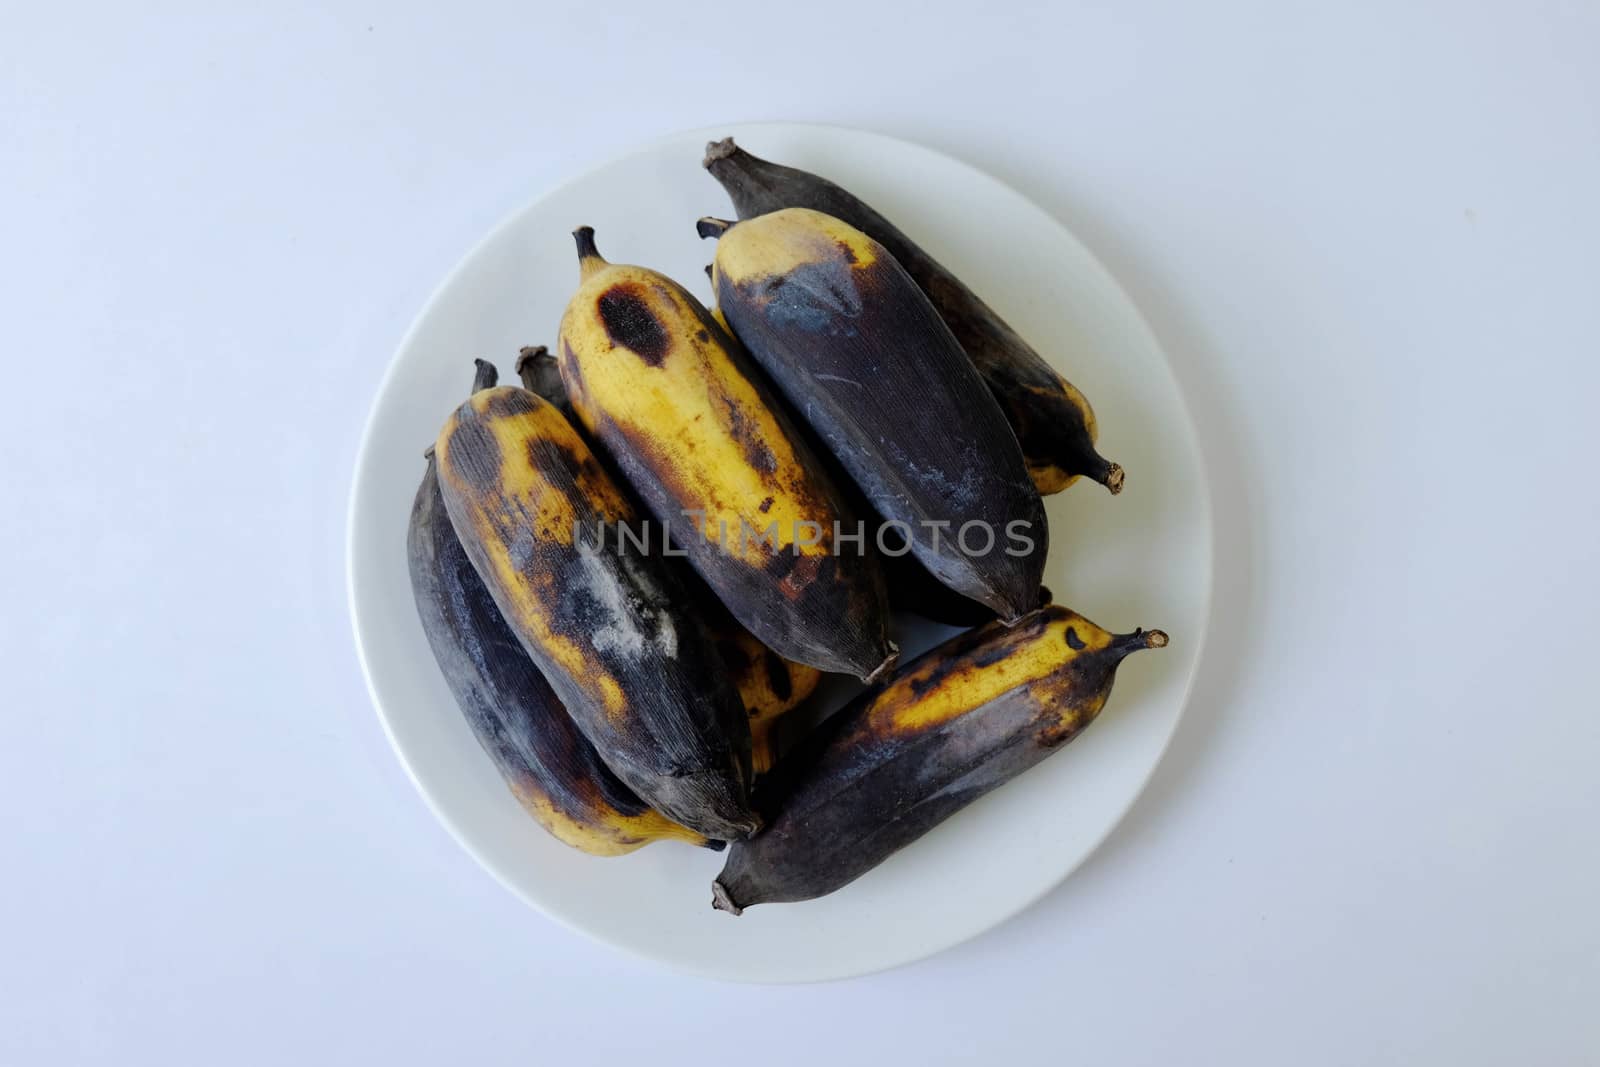 Rotten banana Isolated in a white dish on white background. by e22xua